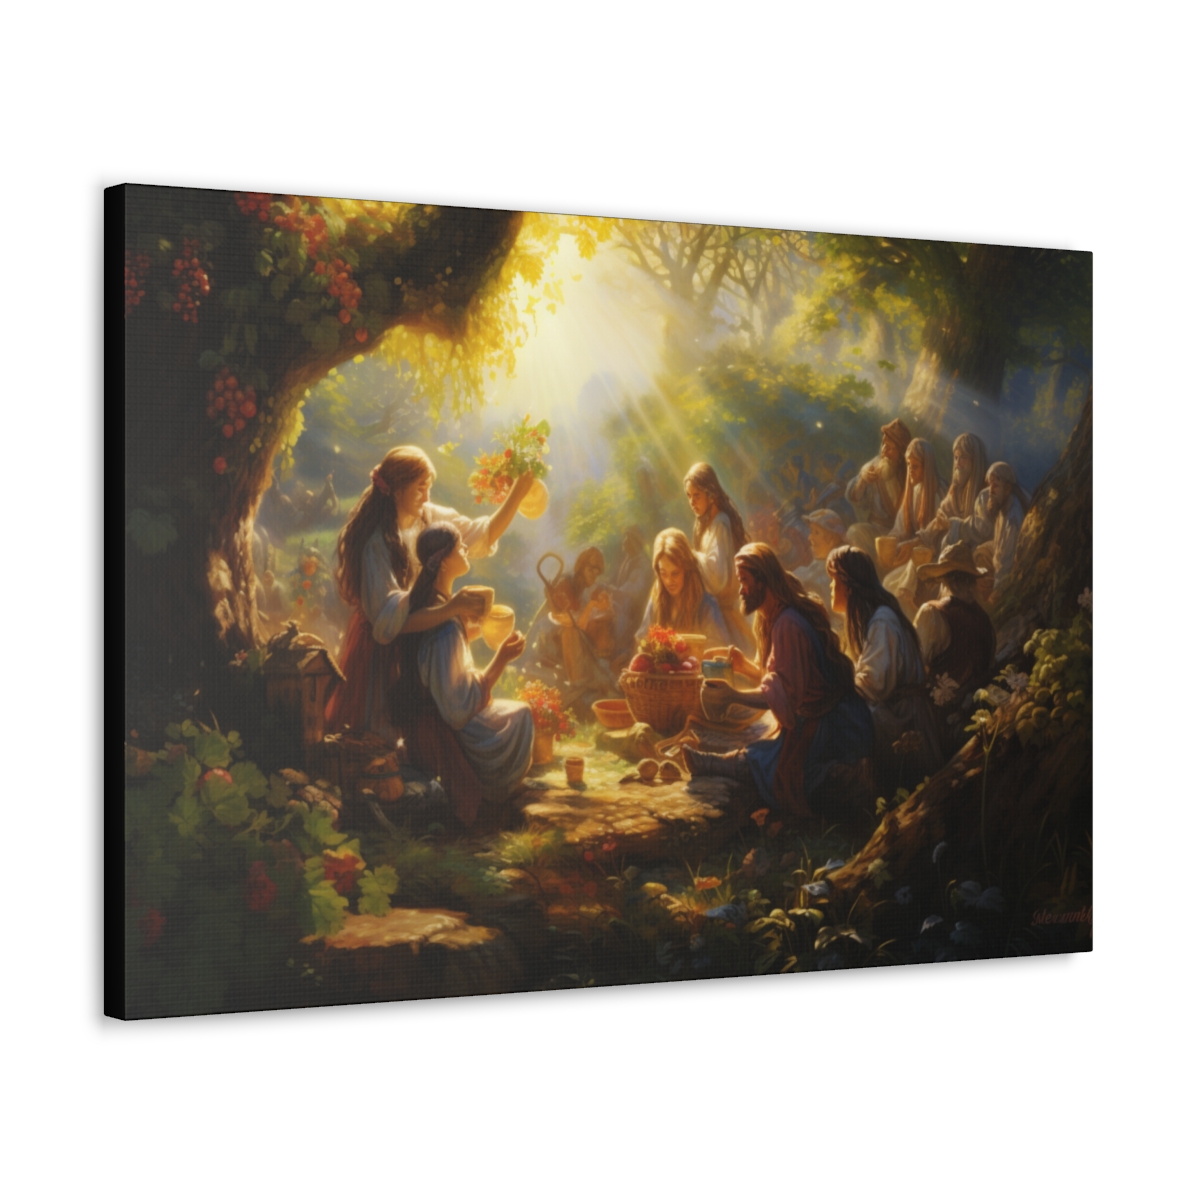 Forest Art Canvas Print: Feasting Among The Trees